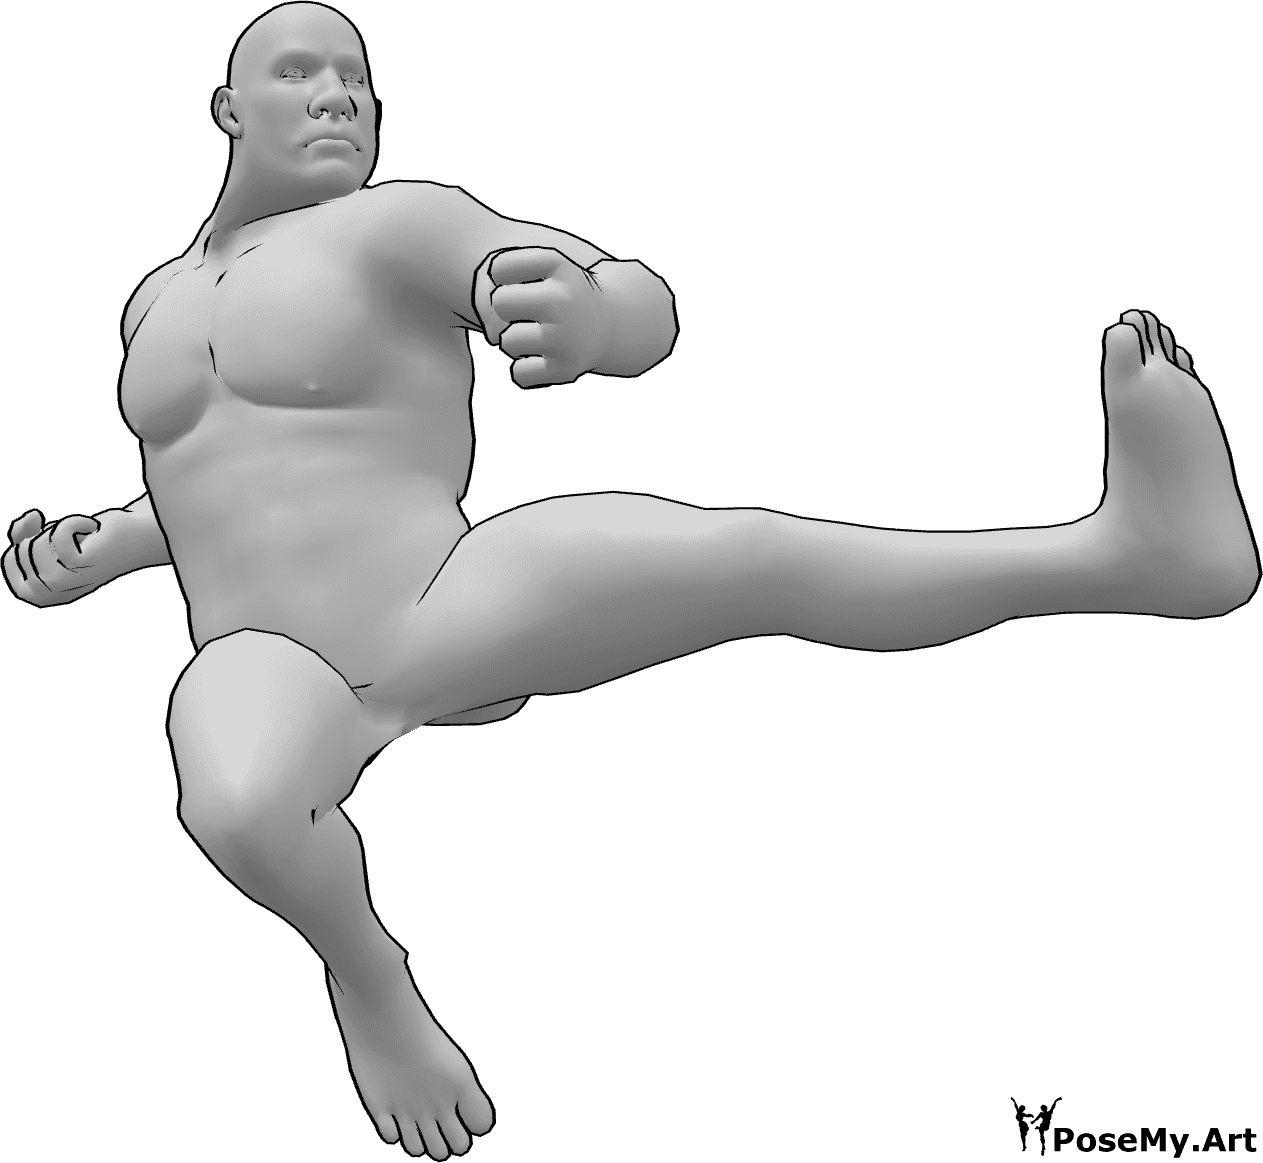 Pose Reference - Brute male kicking pose - Brute male is kicking with his left foot from running, his hands clenched into fists